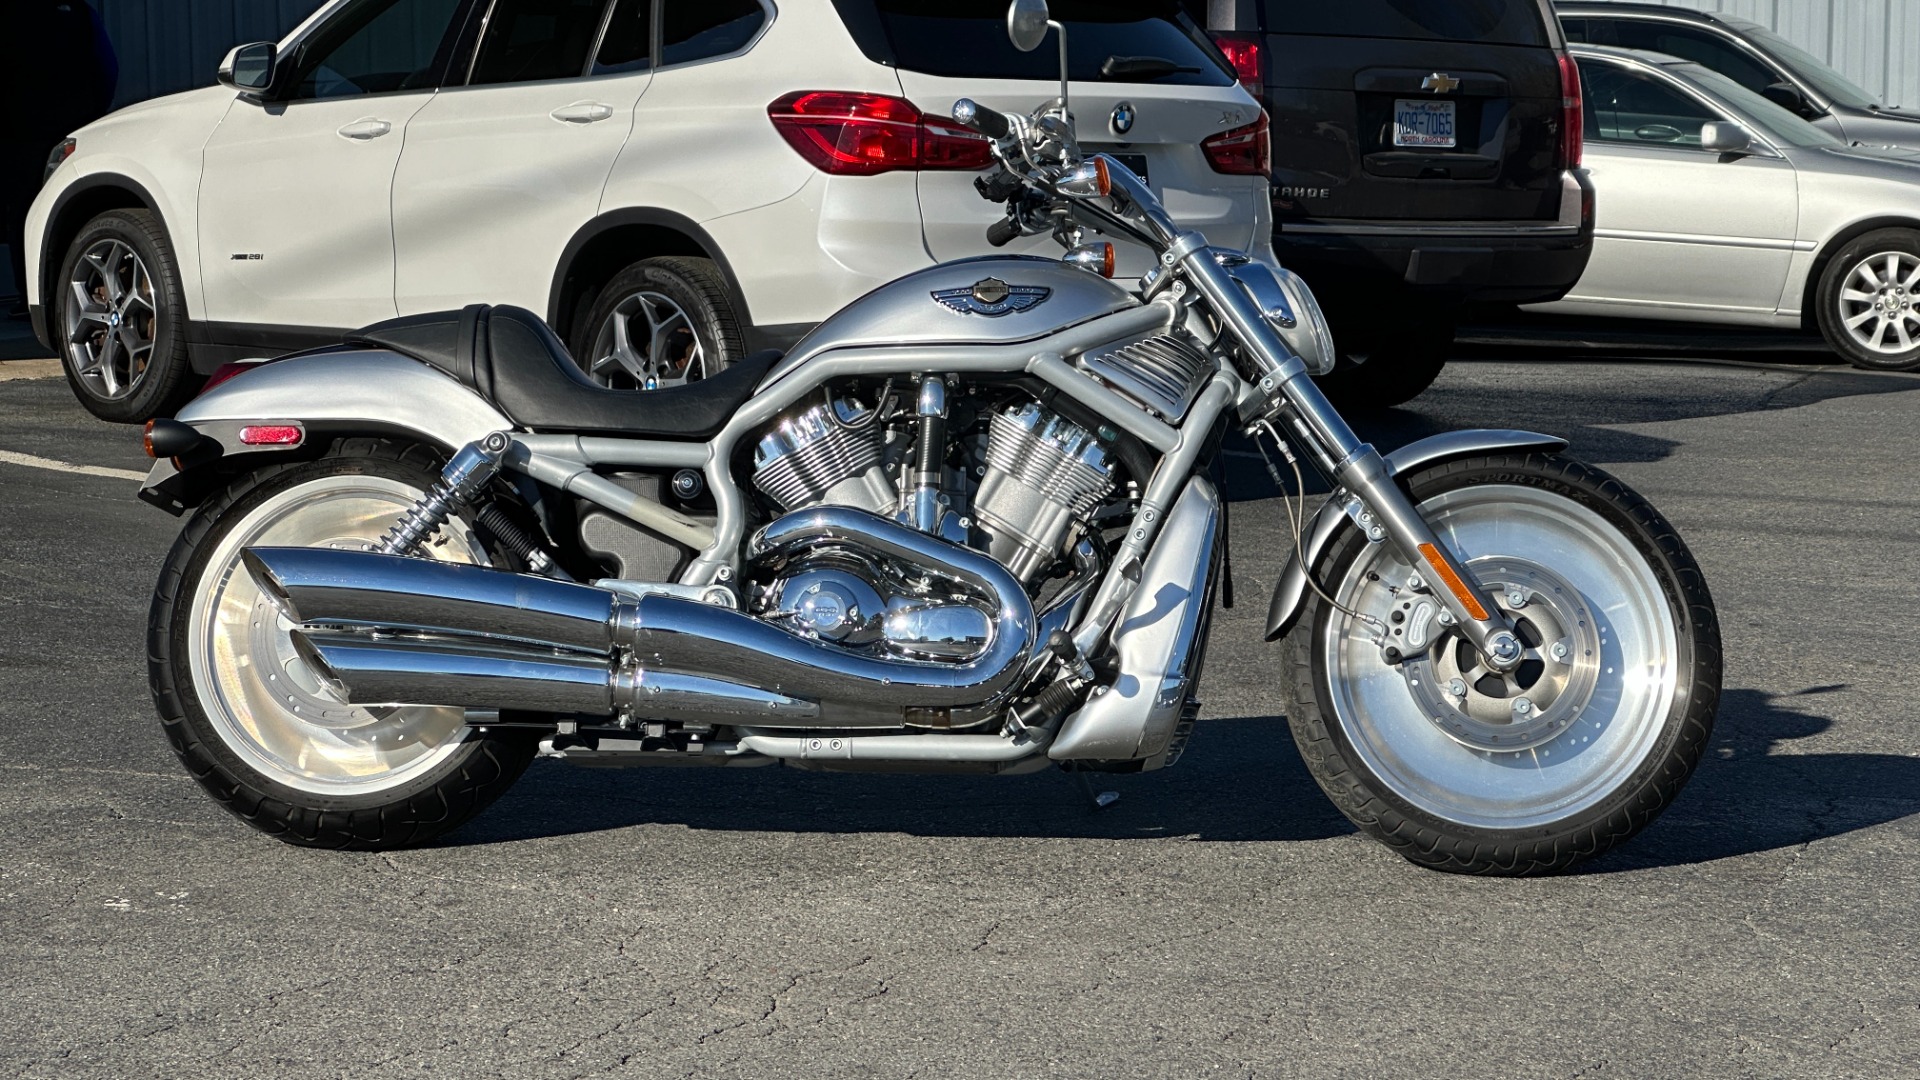 Used 2003 Harley Davidson V Rod ANNIVERSARY EDITION / 1130CC ENGINE / BREMBO BRAKES / VORTEX AIR SCOOPS for sale $7,695 at Formula Imports in Charlotte NC 28227 52